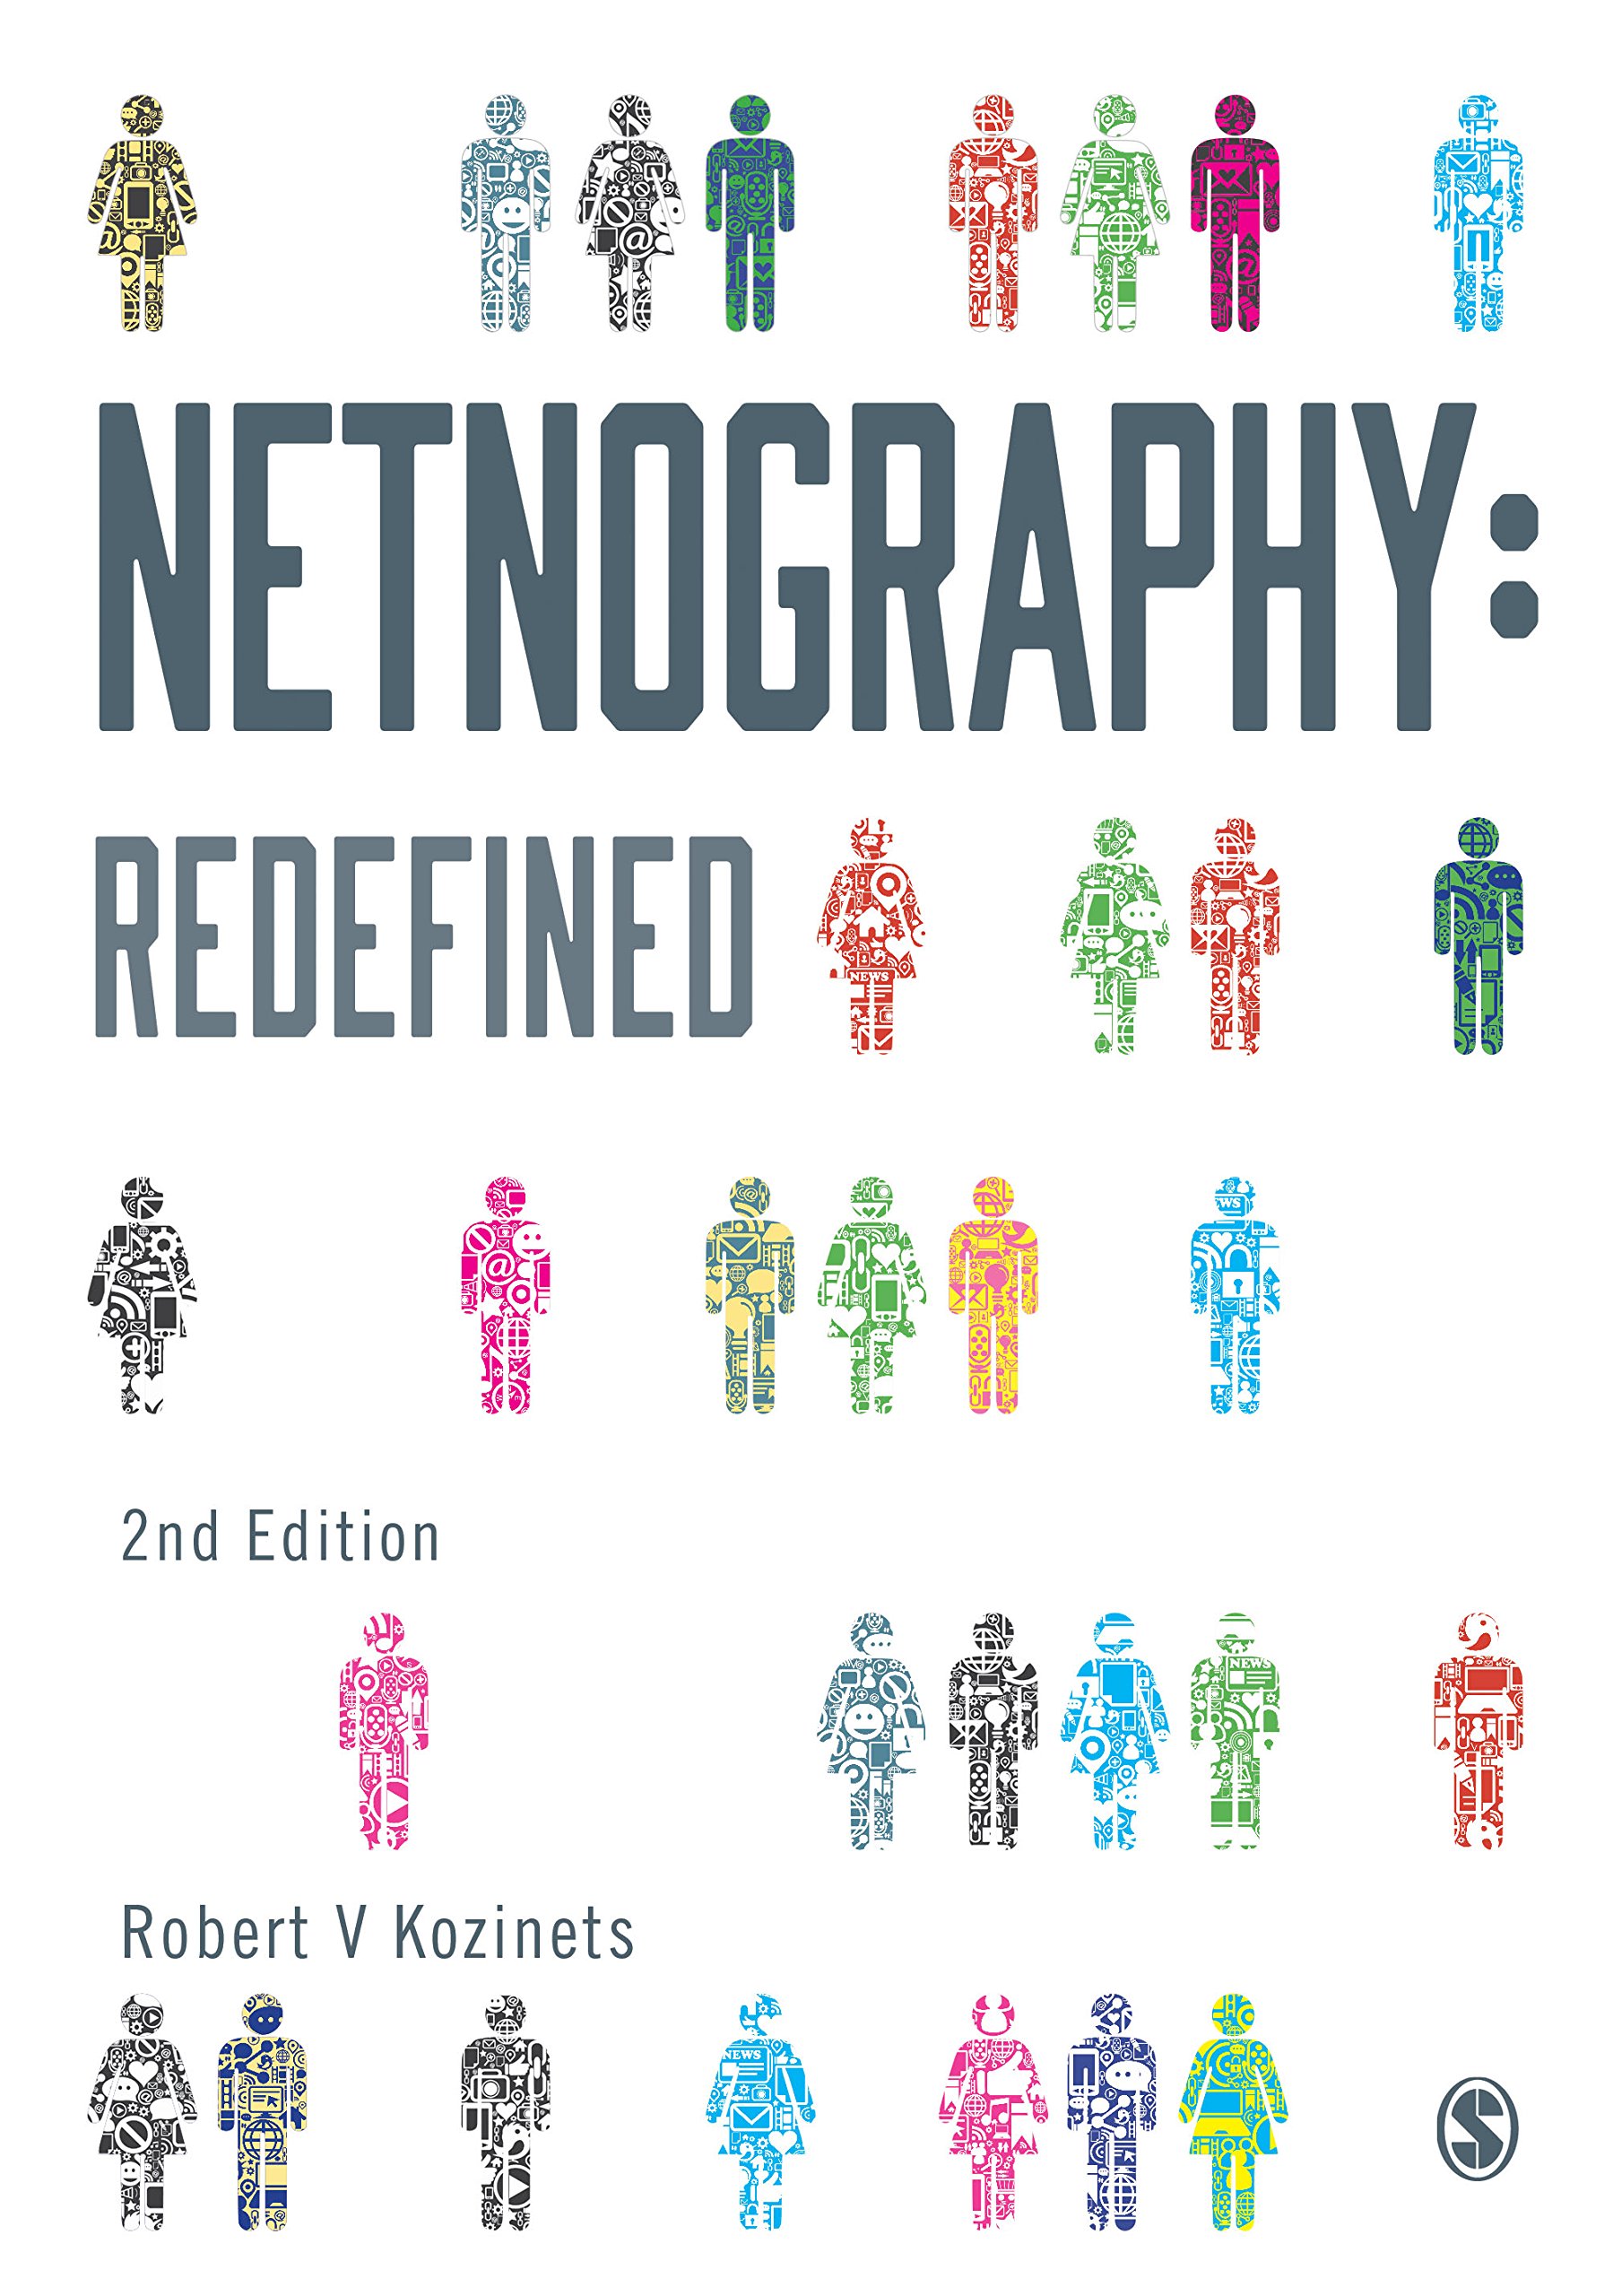 literature on netnography research